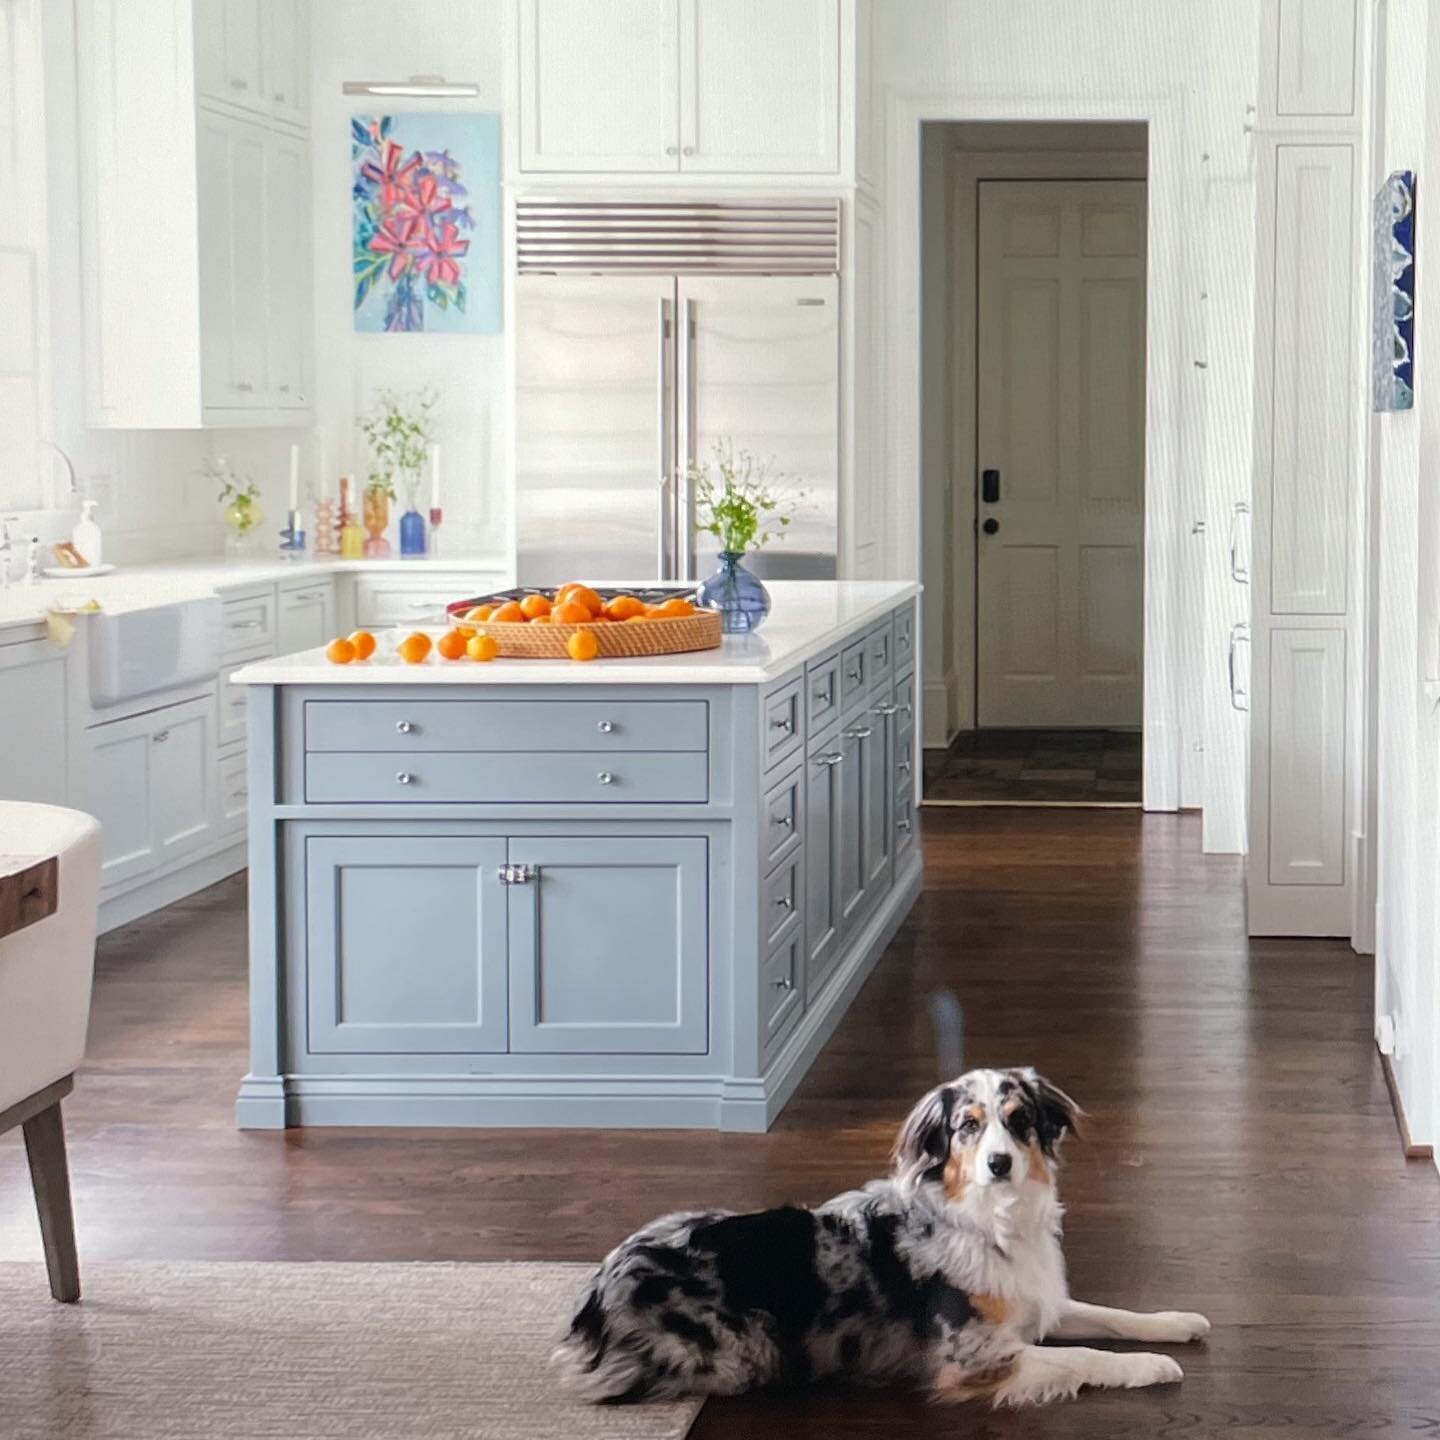 The @atlantahomesmag Tour of Kitchens is next weekend and our kitchen (this one!!) is on tour on Sunday from 11-5. We are giving away 2 tickets! Tag a friend in the comments who is a kitchen/interiors/blue island/dog lover too for a chance to win 😊W